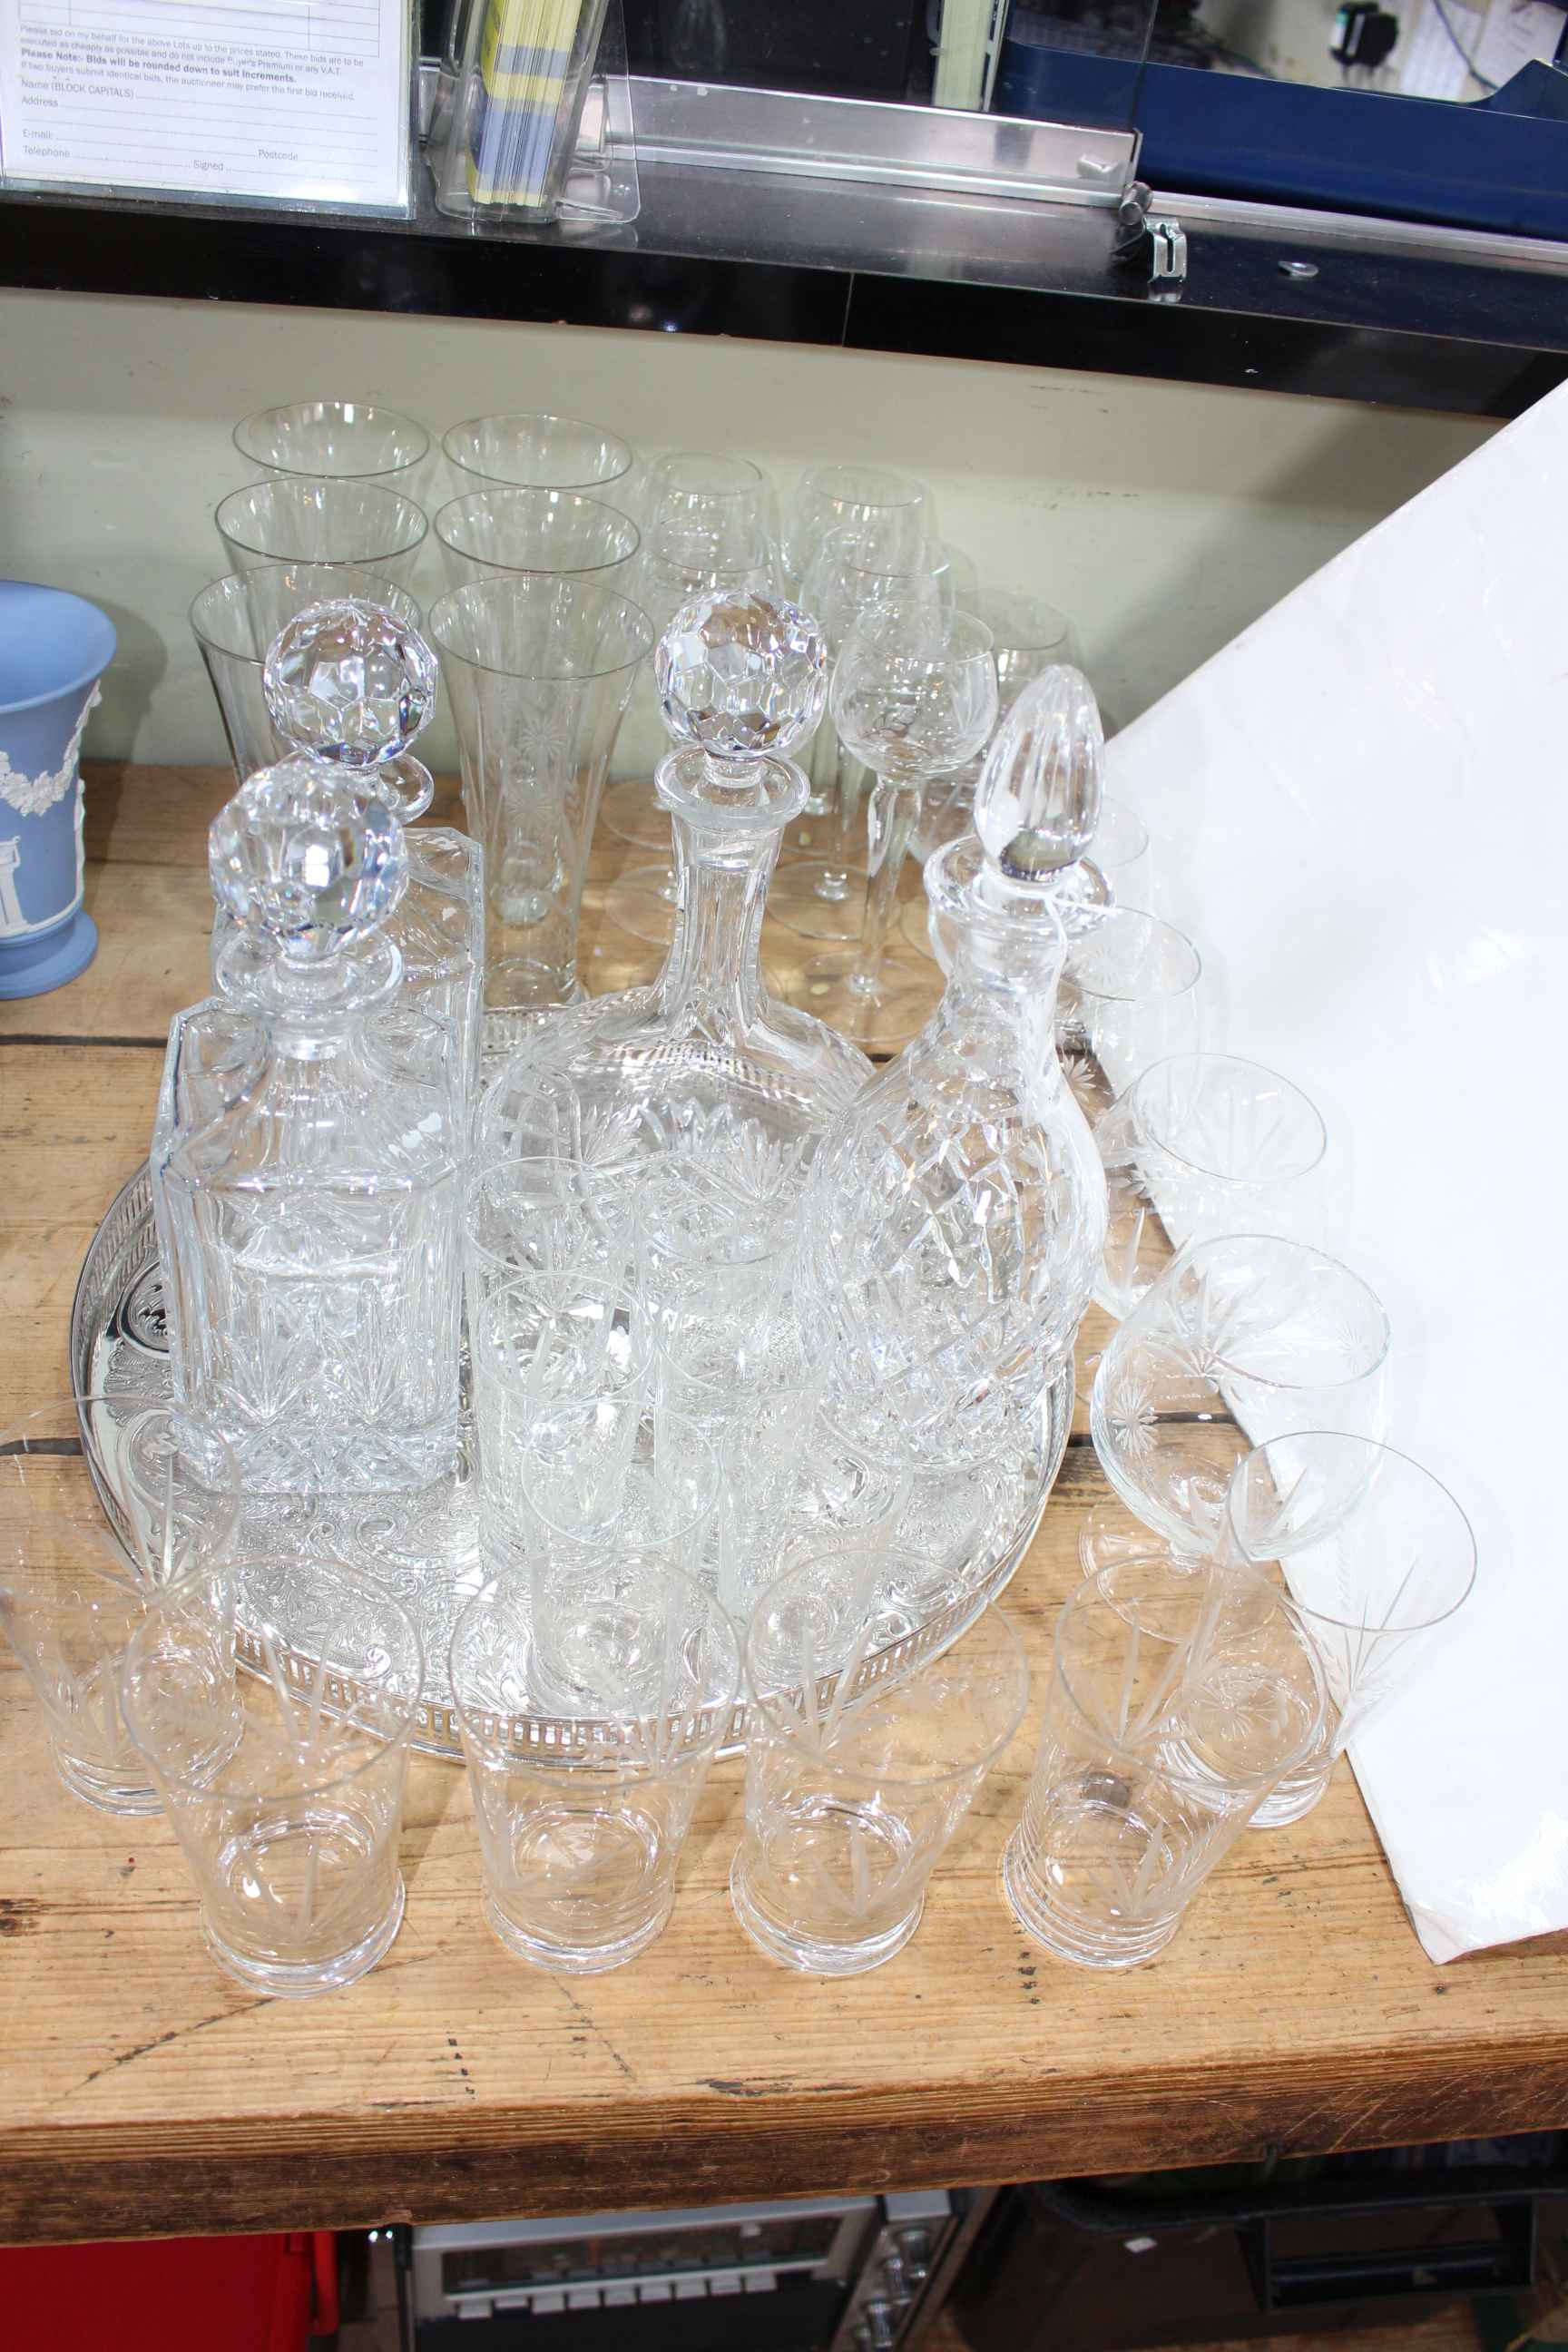 A suite of 30 etched and cut glasses, four decanters and a silver plated tray.